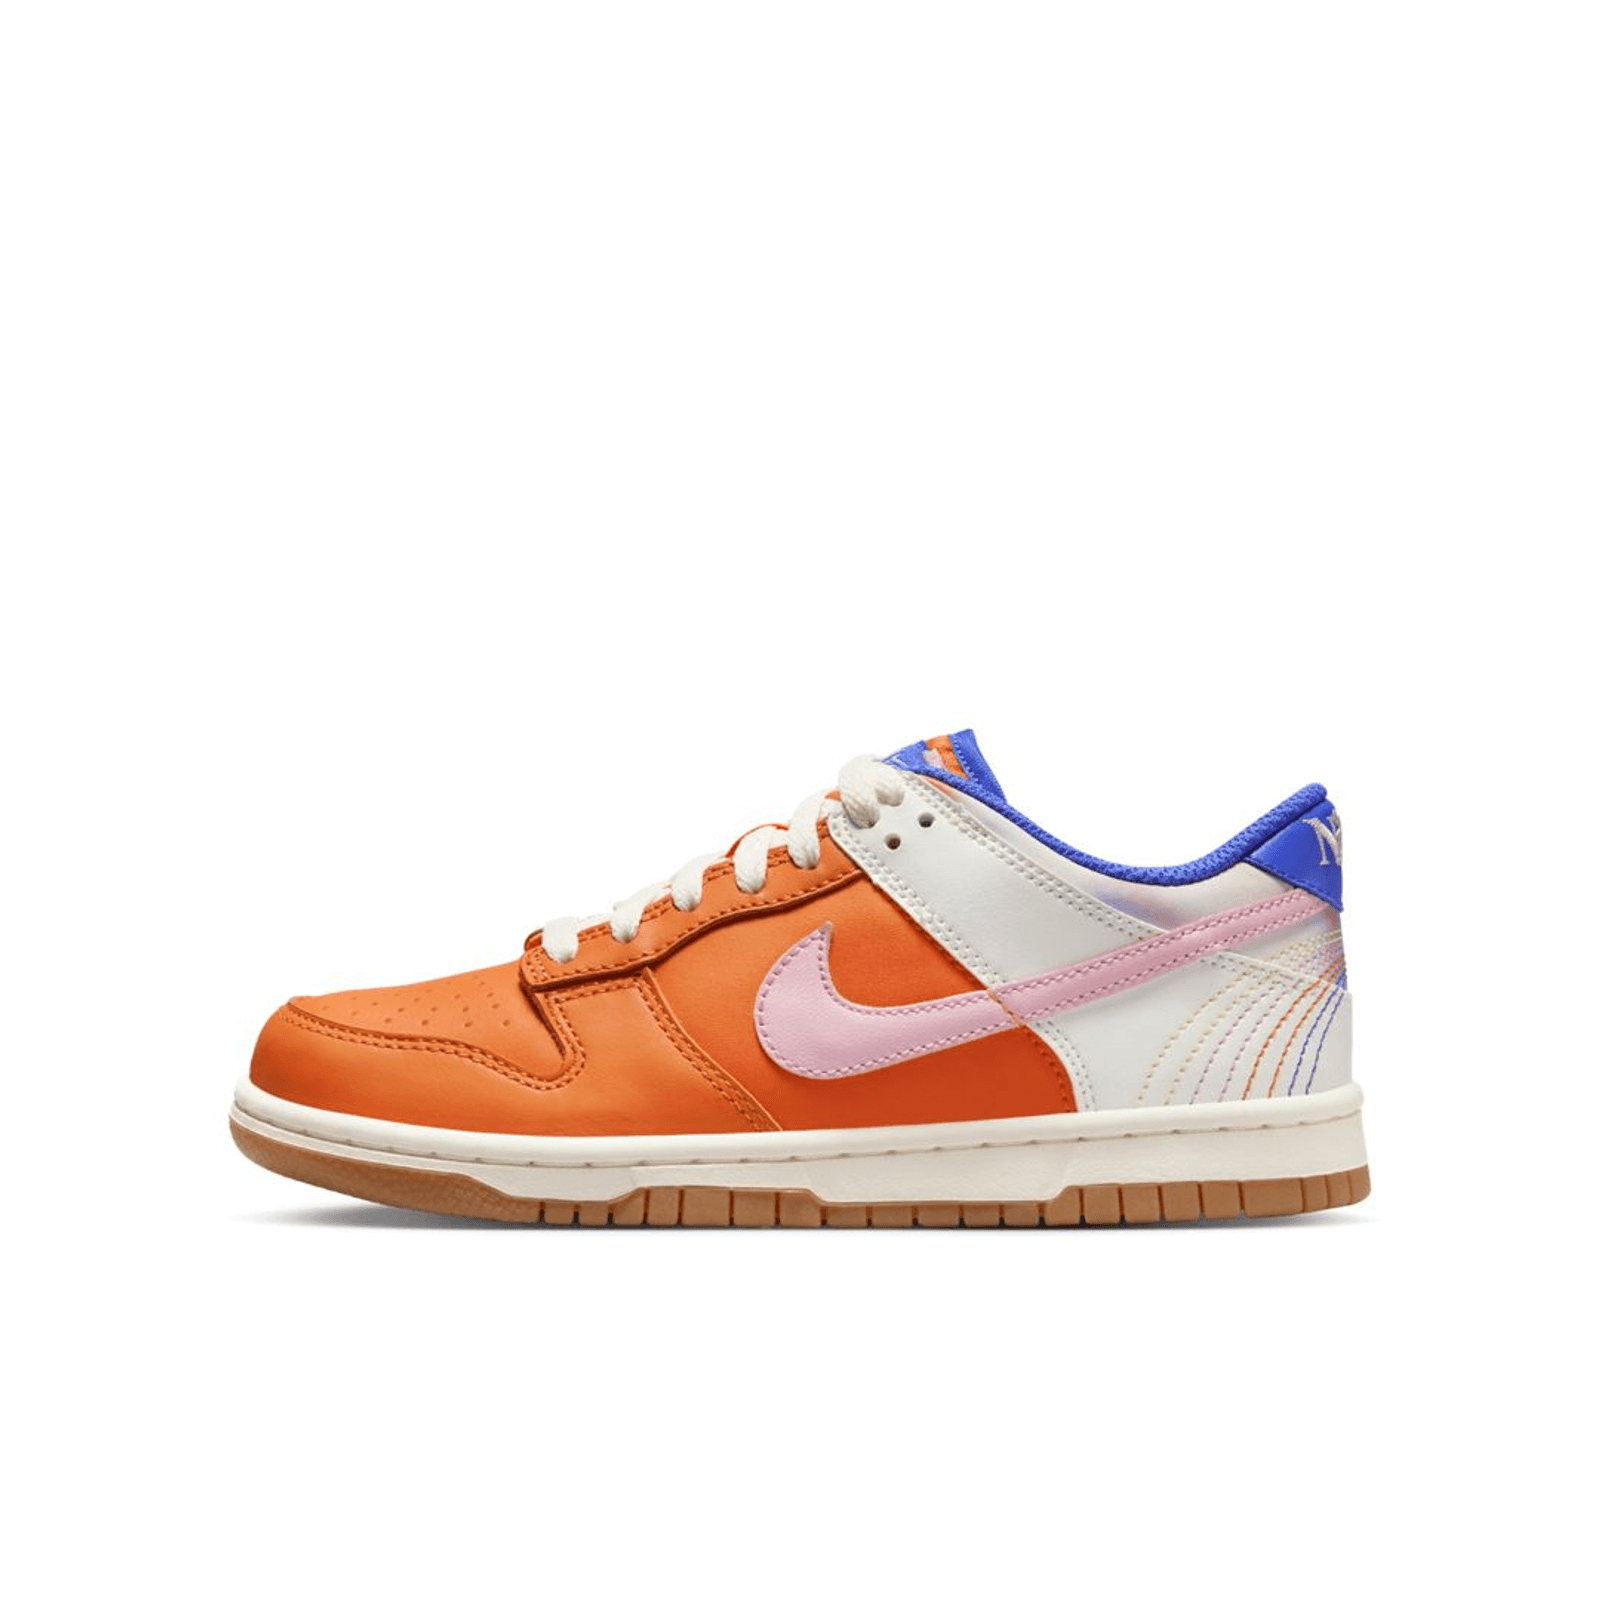 The Nike Dunk Low Gets The 